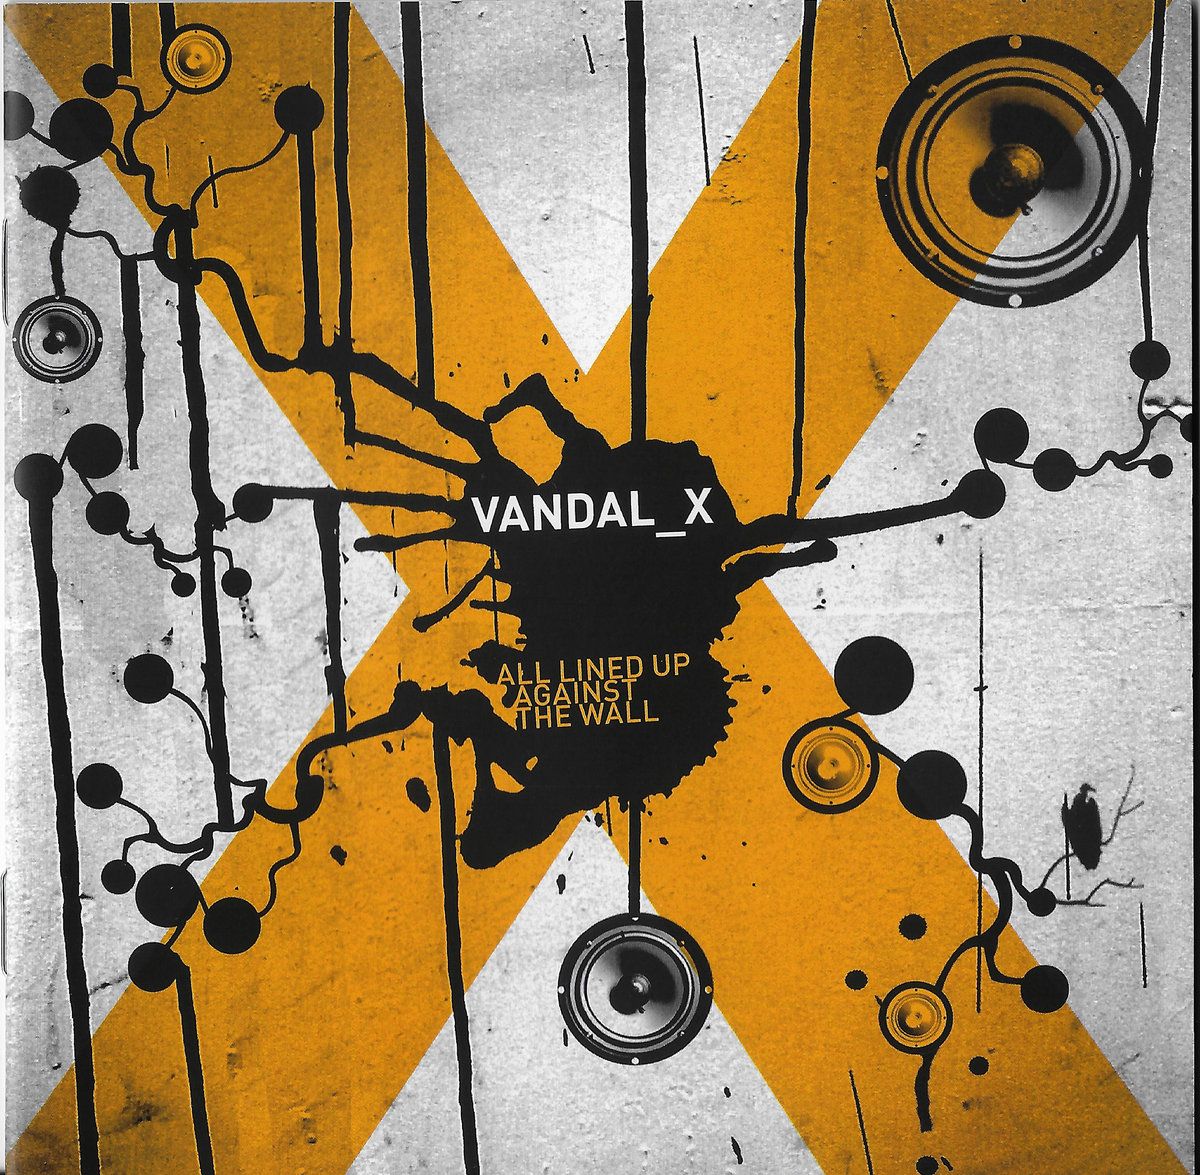 Vandal X - All Lined Up Against The Wall front cover